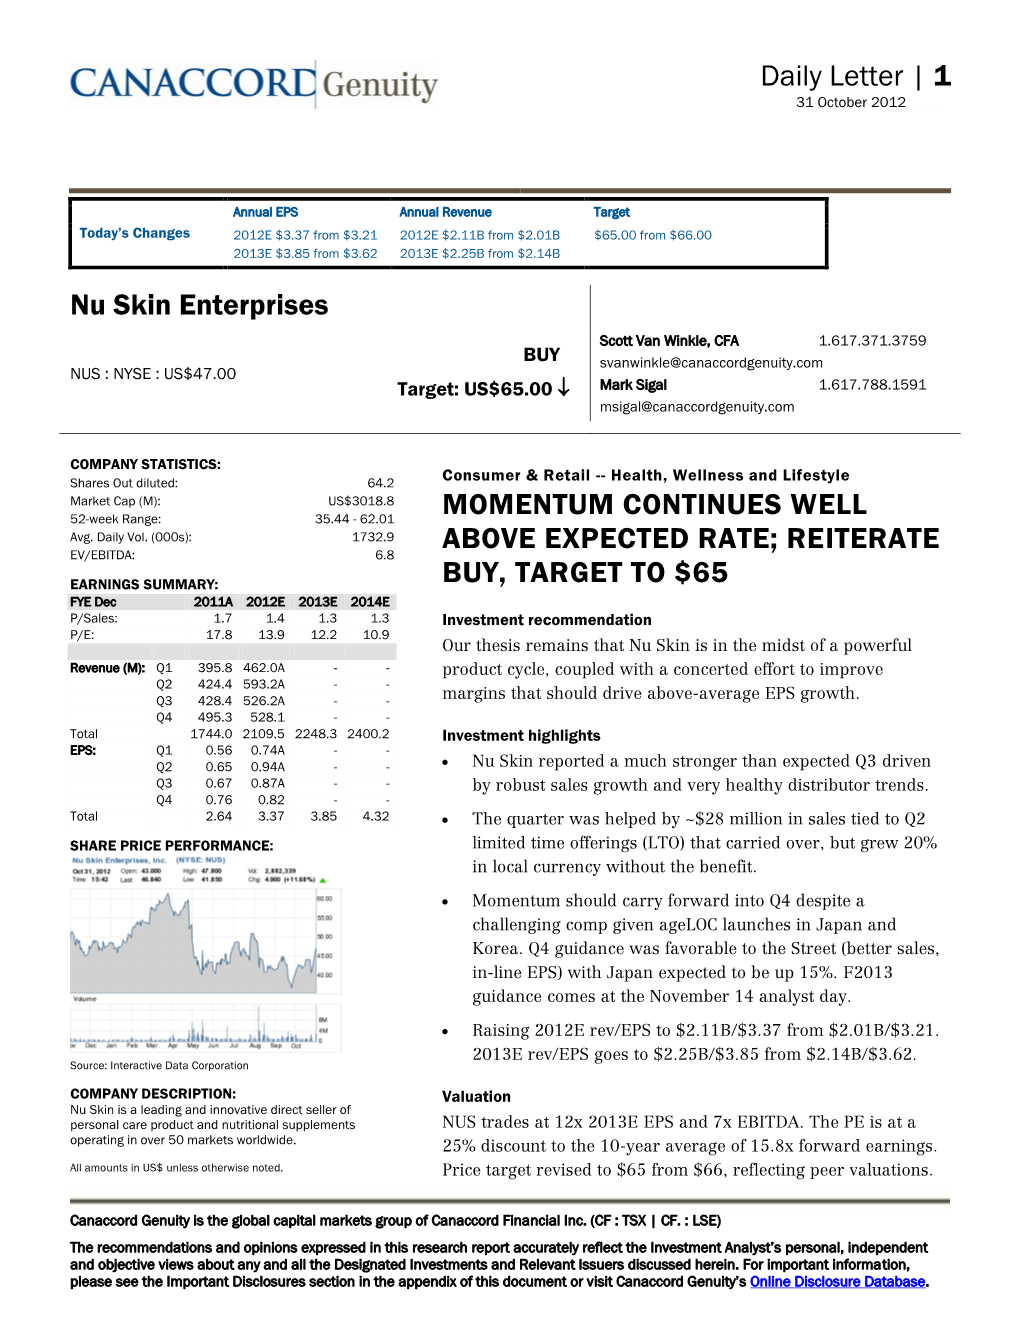 Daily Letter | 1 Nu Skin Enterprises MOMENTUM CONTINUES WELL